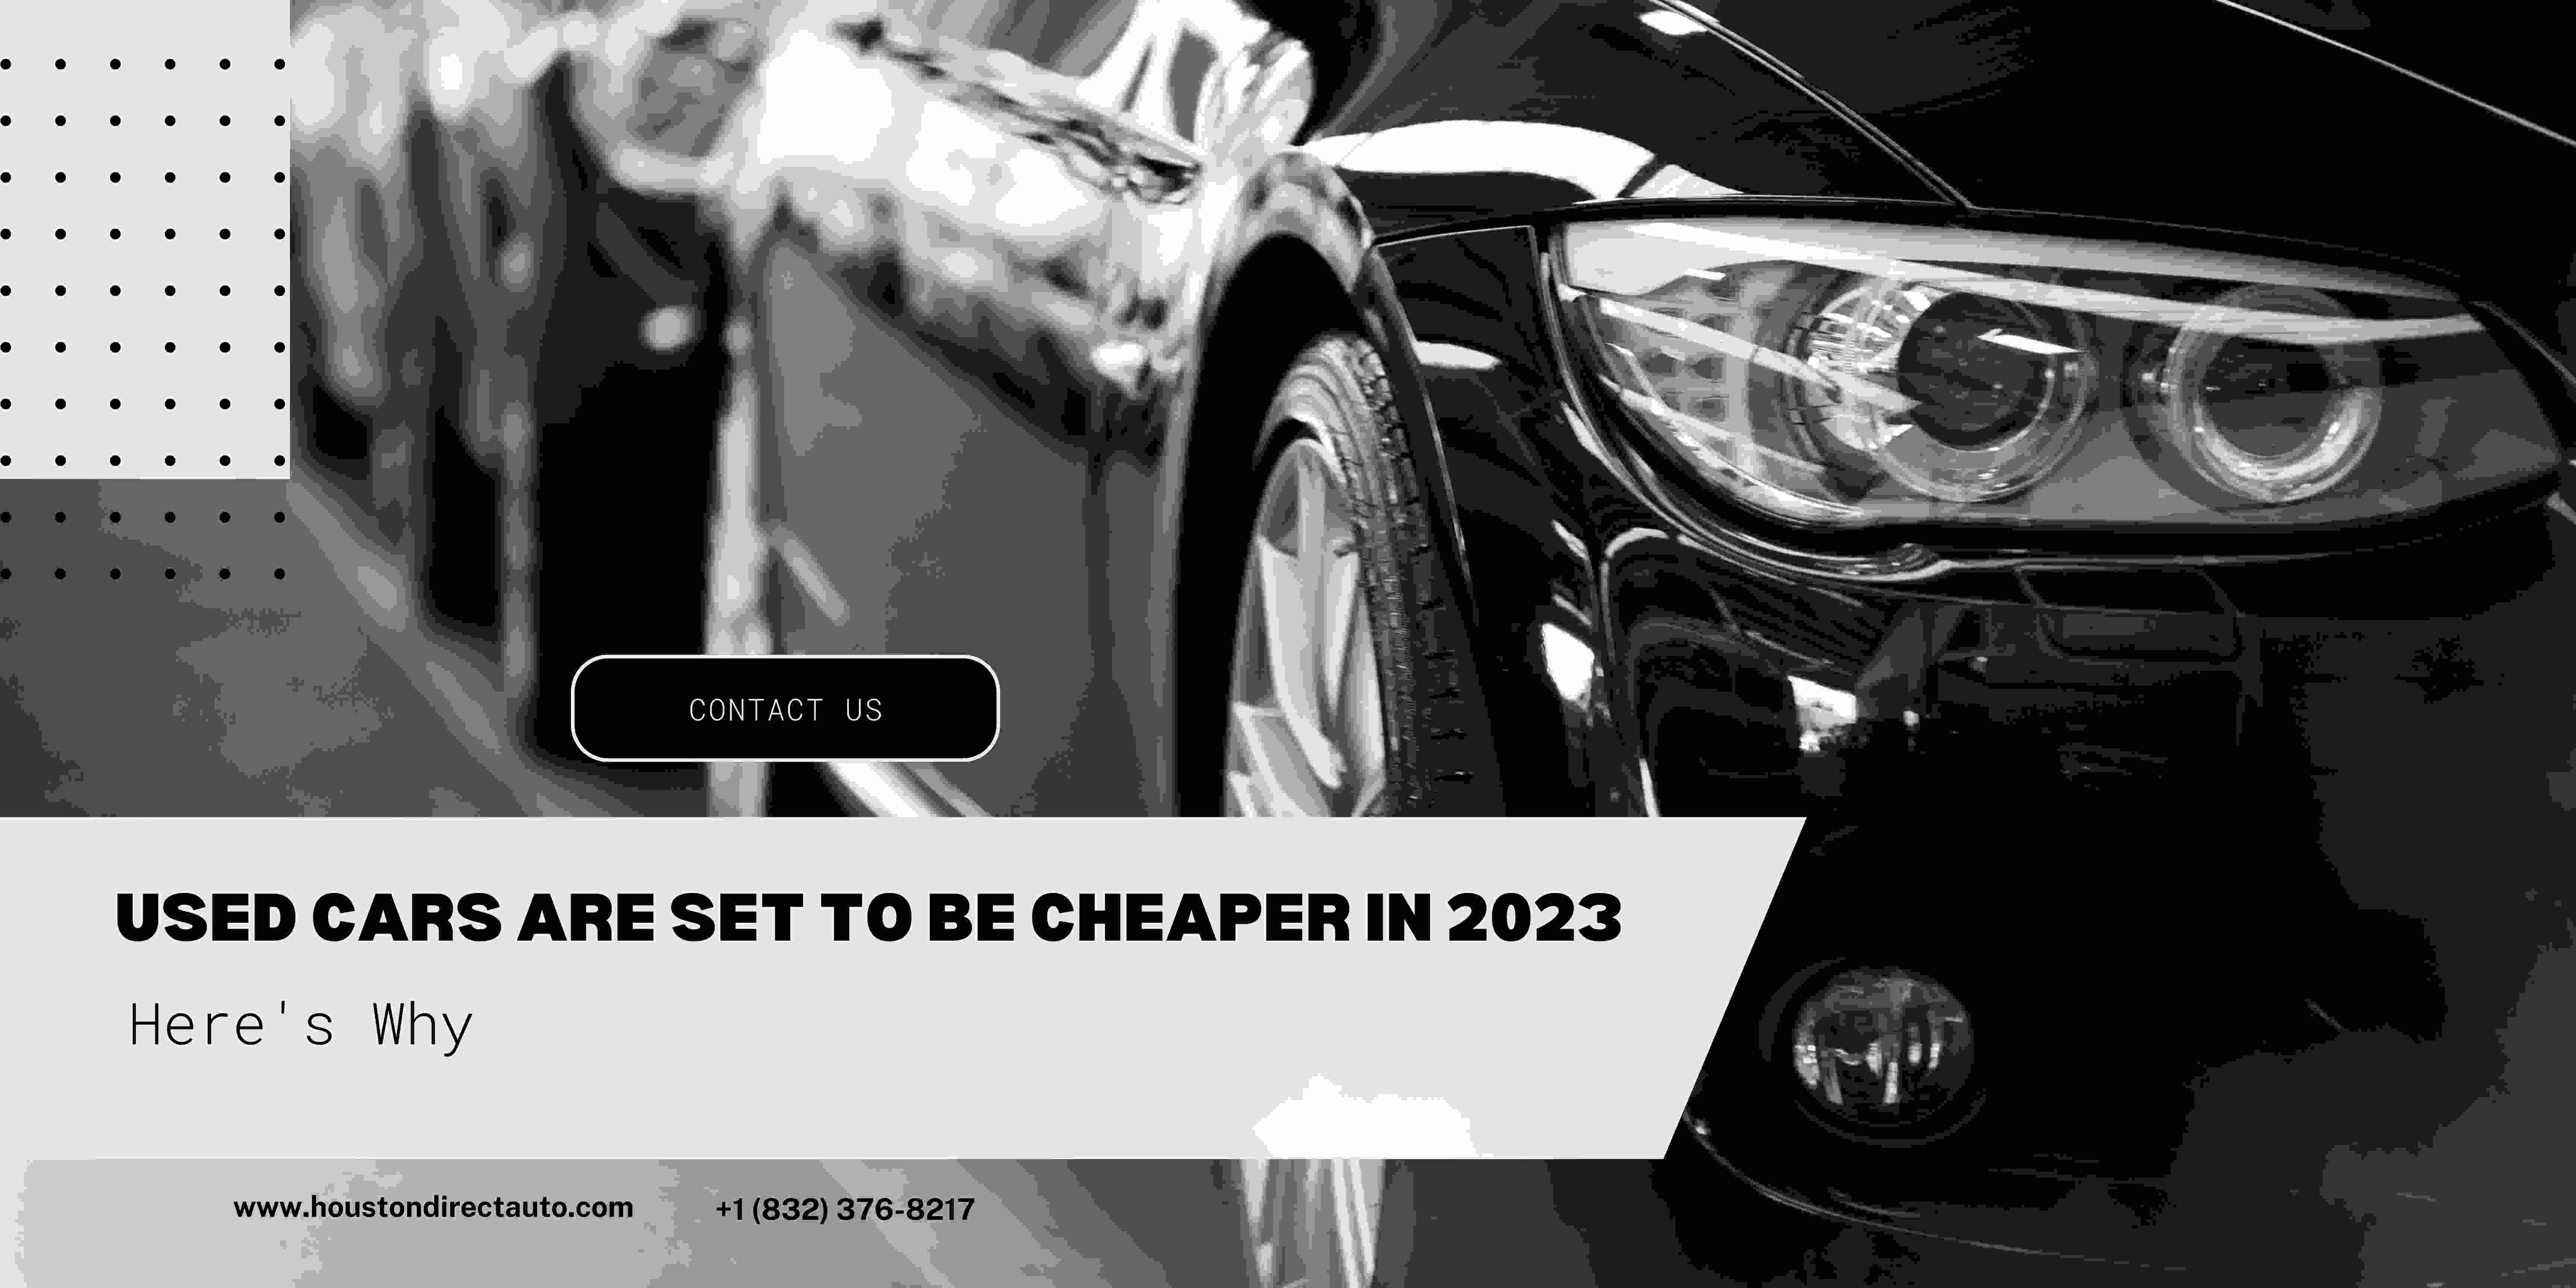 Used Cars Are Set To Be Cheaper In 2023 Here's Why